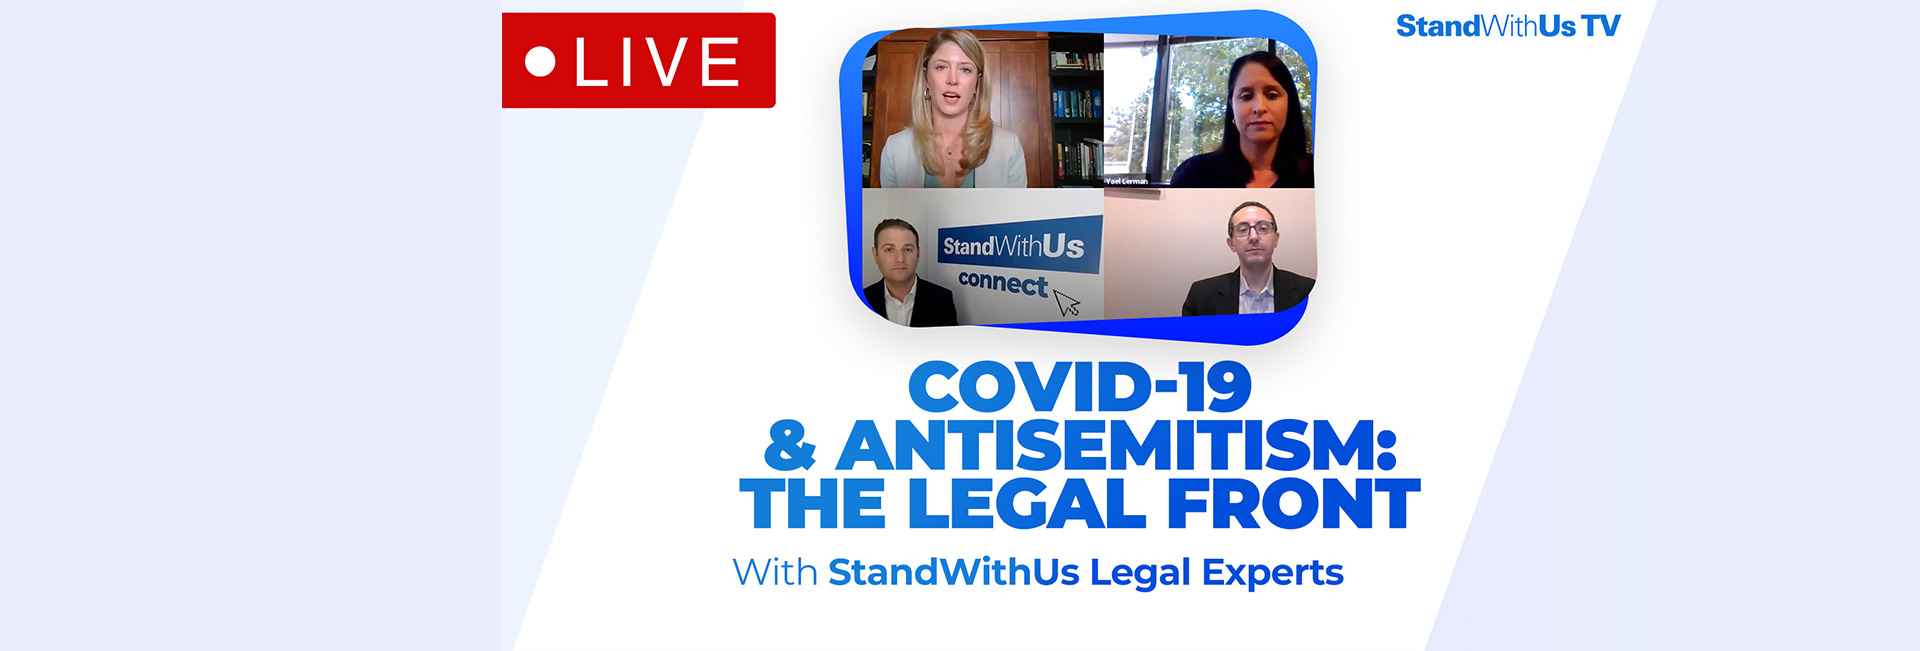 COVID-19 & Antisemitism: The Legal Front